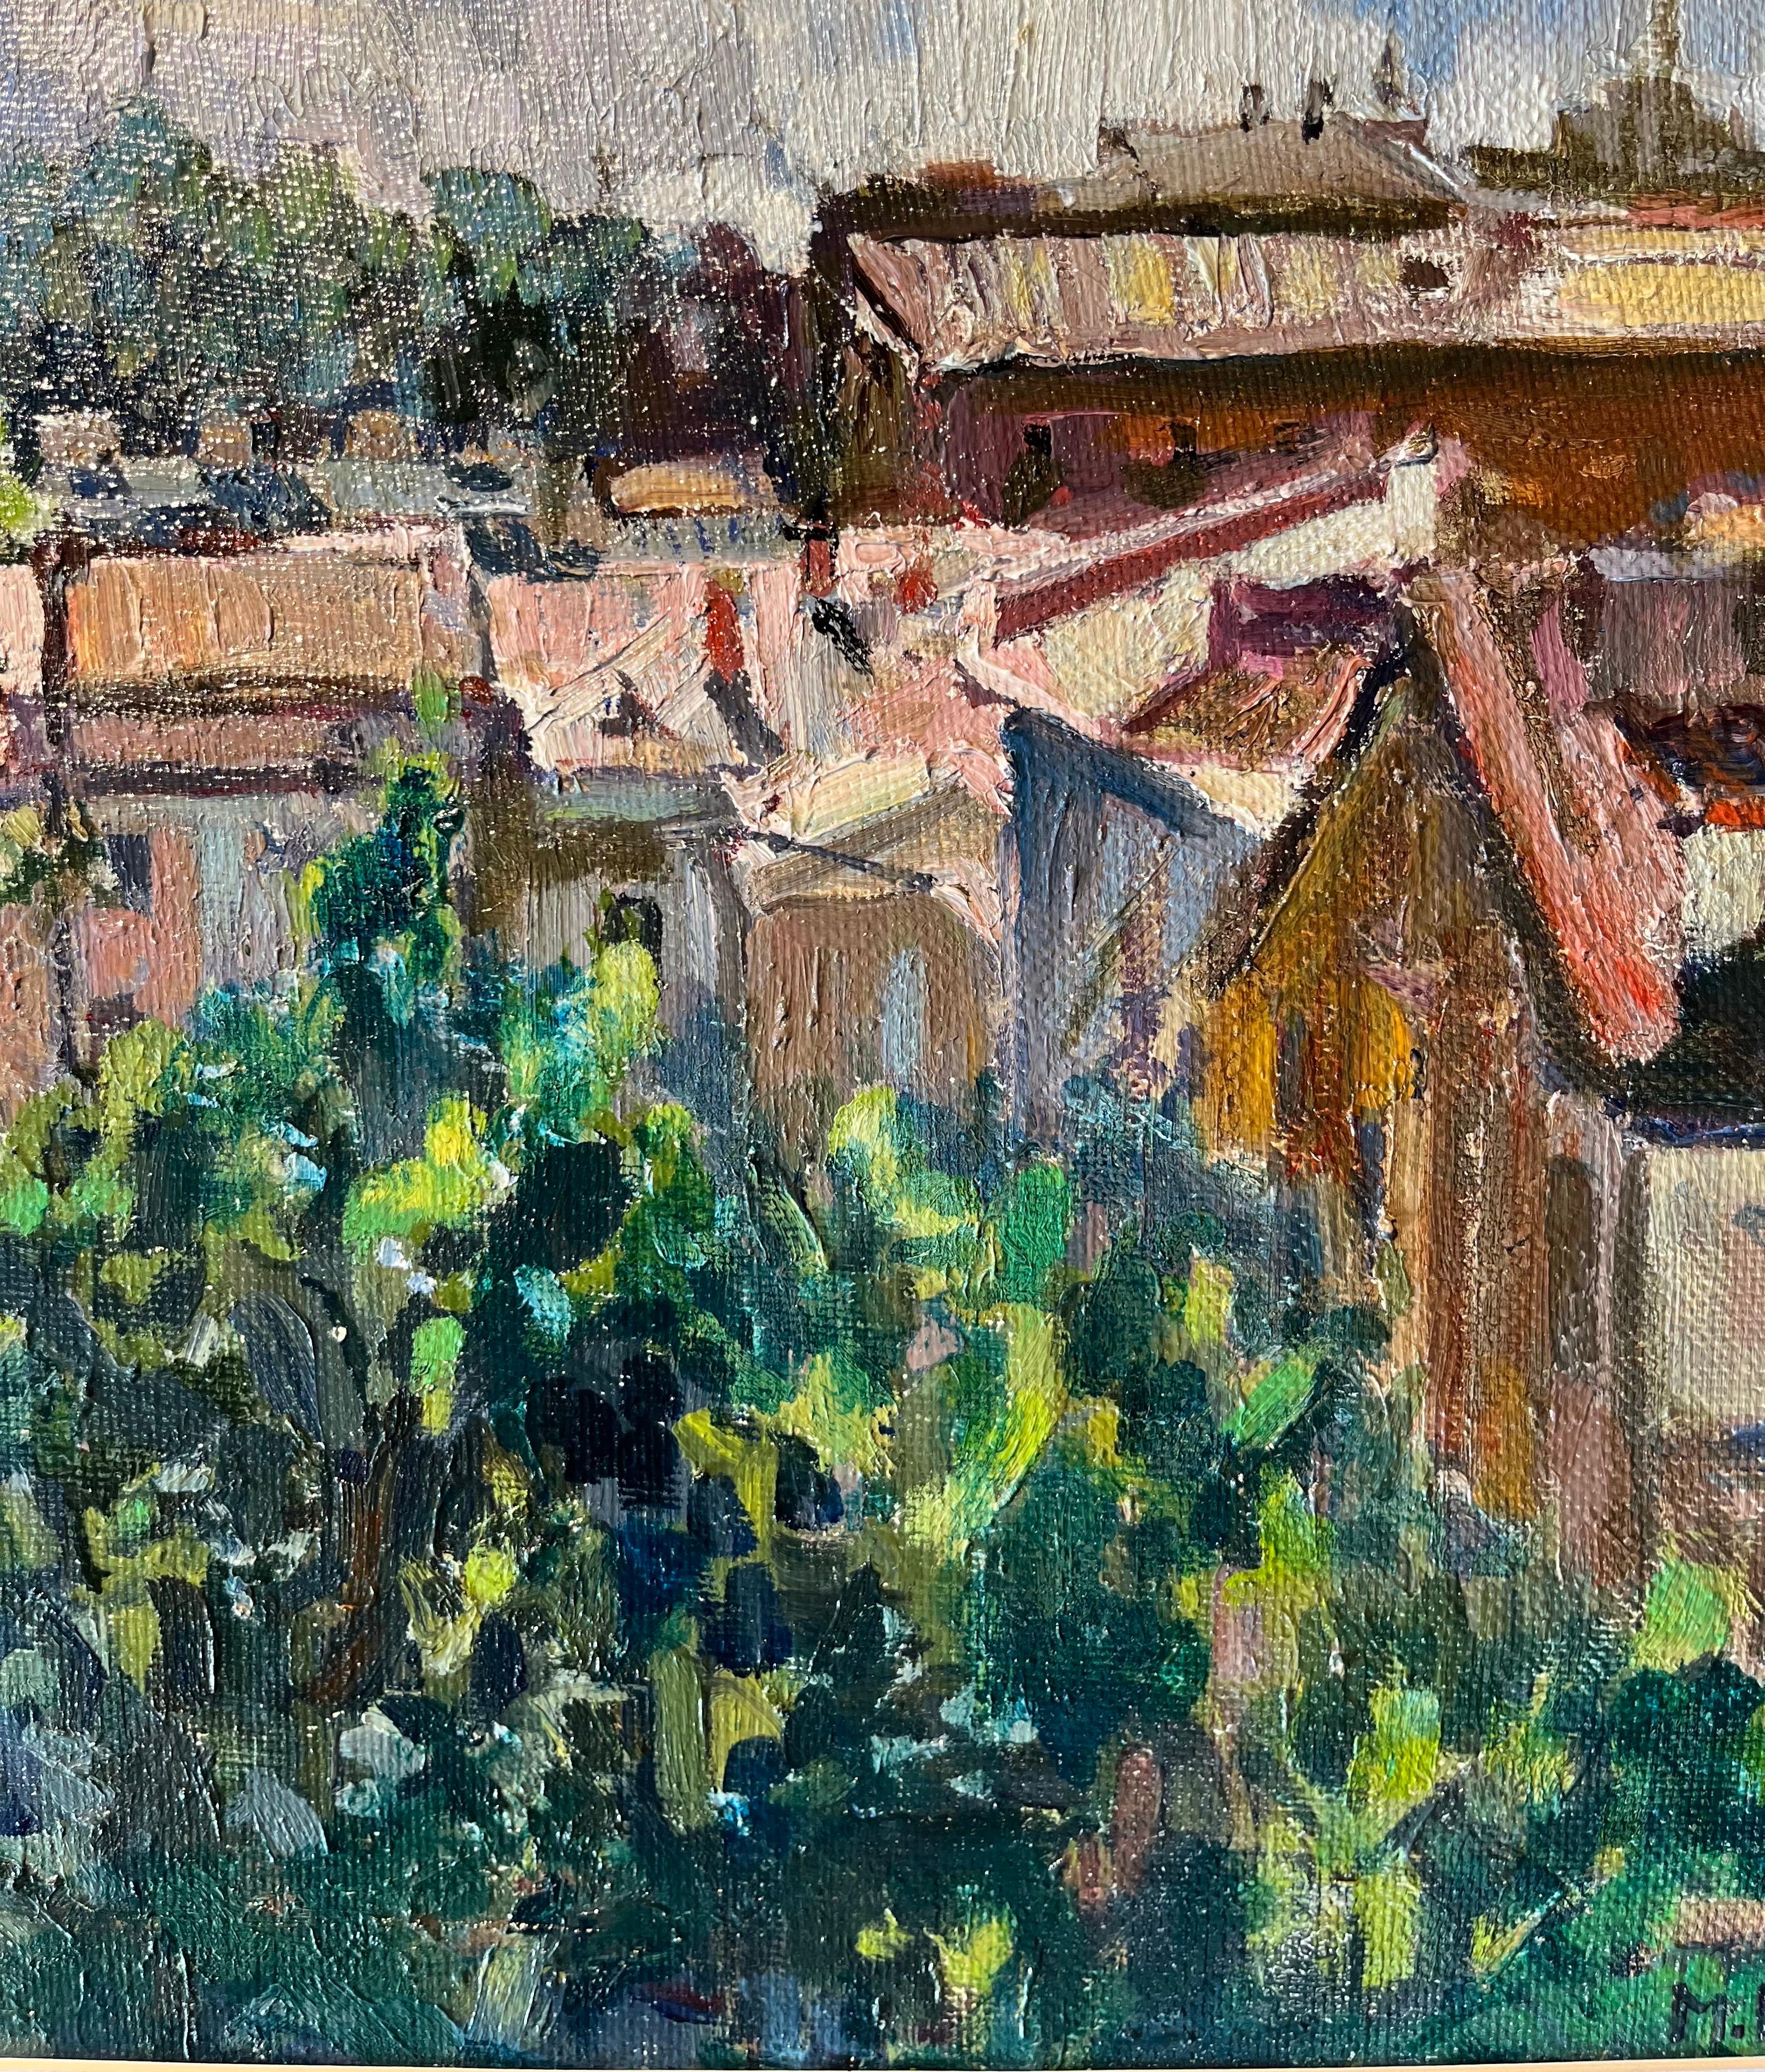 Landscape from the roofs, green,
MAYA KOPITZEVA    (Gagra, Georgia, 1924 - 2005)

Maya kopitzeva’s works have been acquired by the Russian Ministry of Culture, by the Foundation for the Russian Culture, by various collectors in Europe, Japan, United